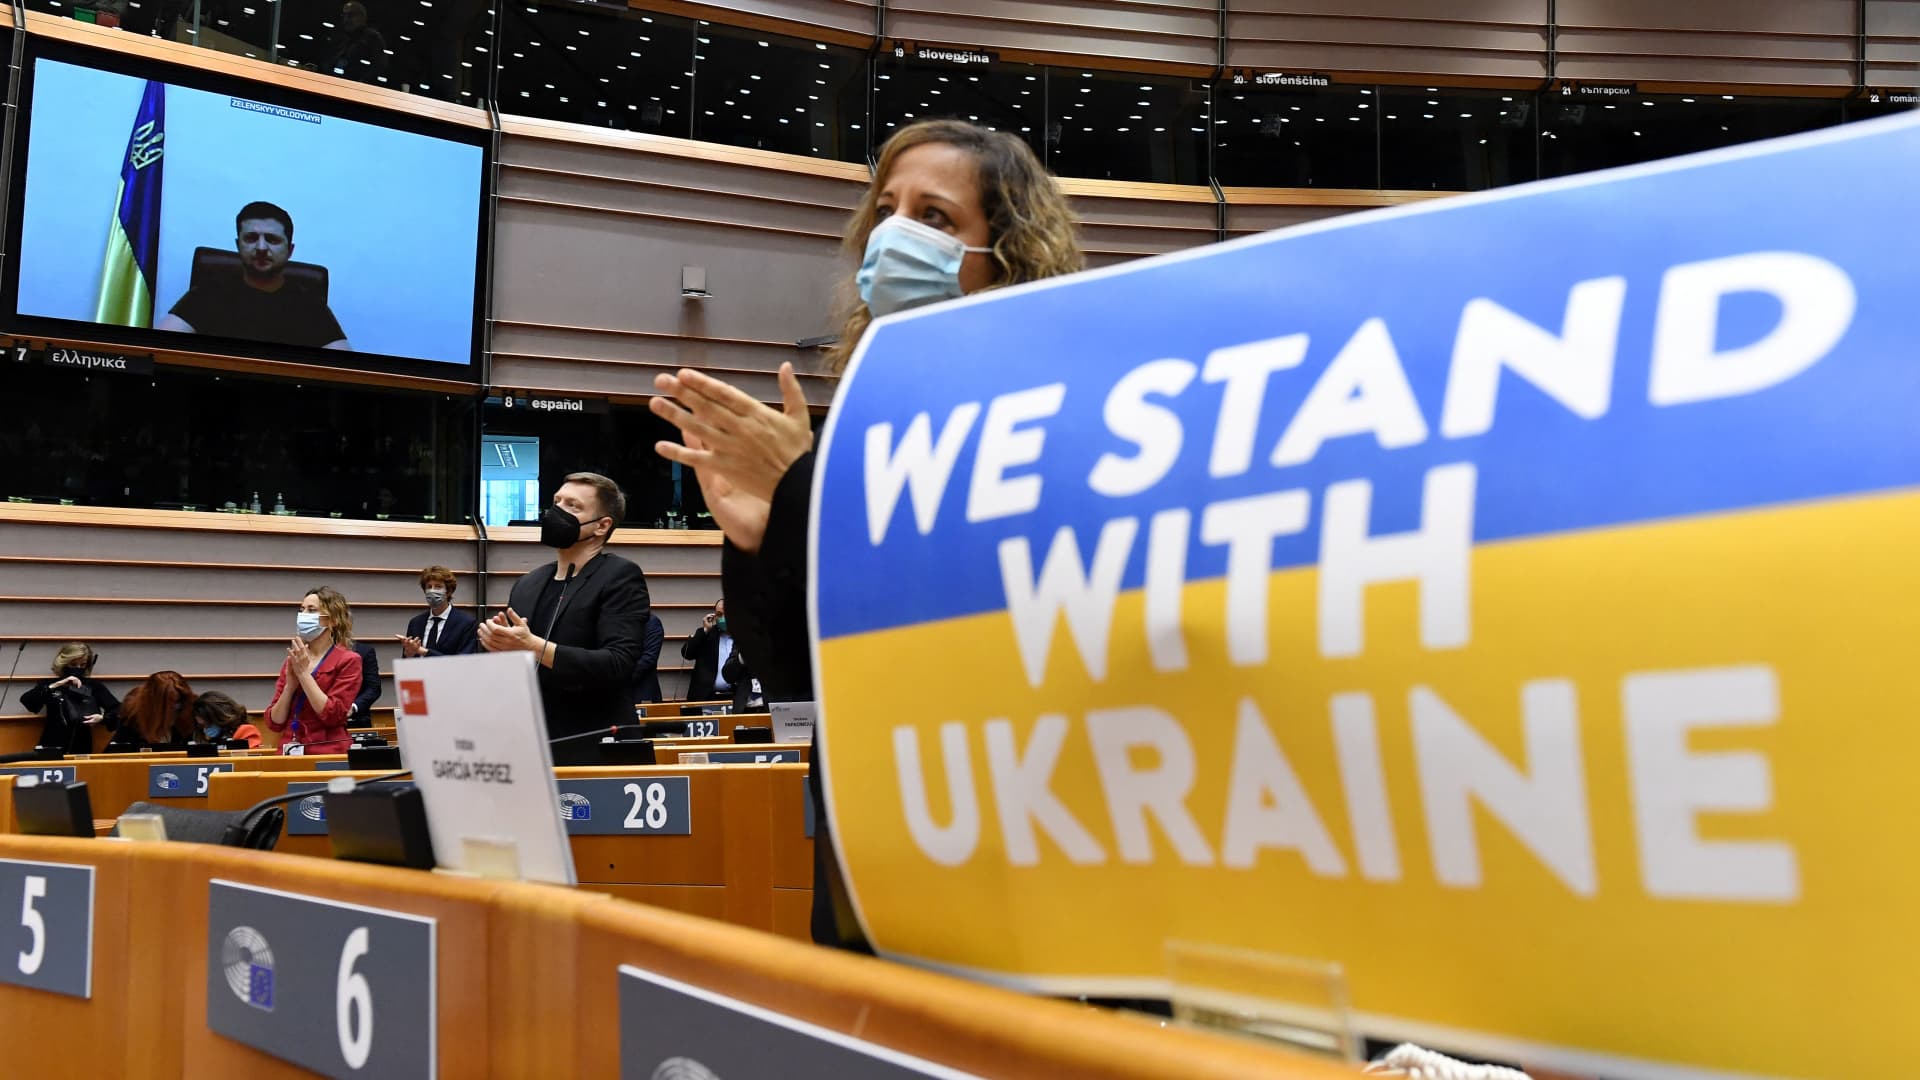 Members of the European Parliament applaud Ukrainian President Volodymyr Zelenskyy who appears on a screen as he speaks in a video conference during a special plenary session of the European Parliament focused on the Russian invasion of Ukraine at the EU headquarters in Brussels, on March 01, 2022.